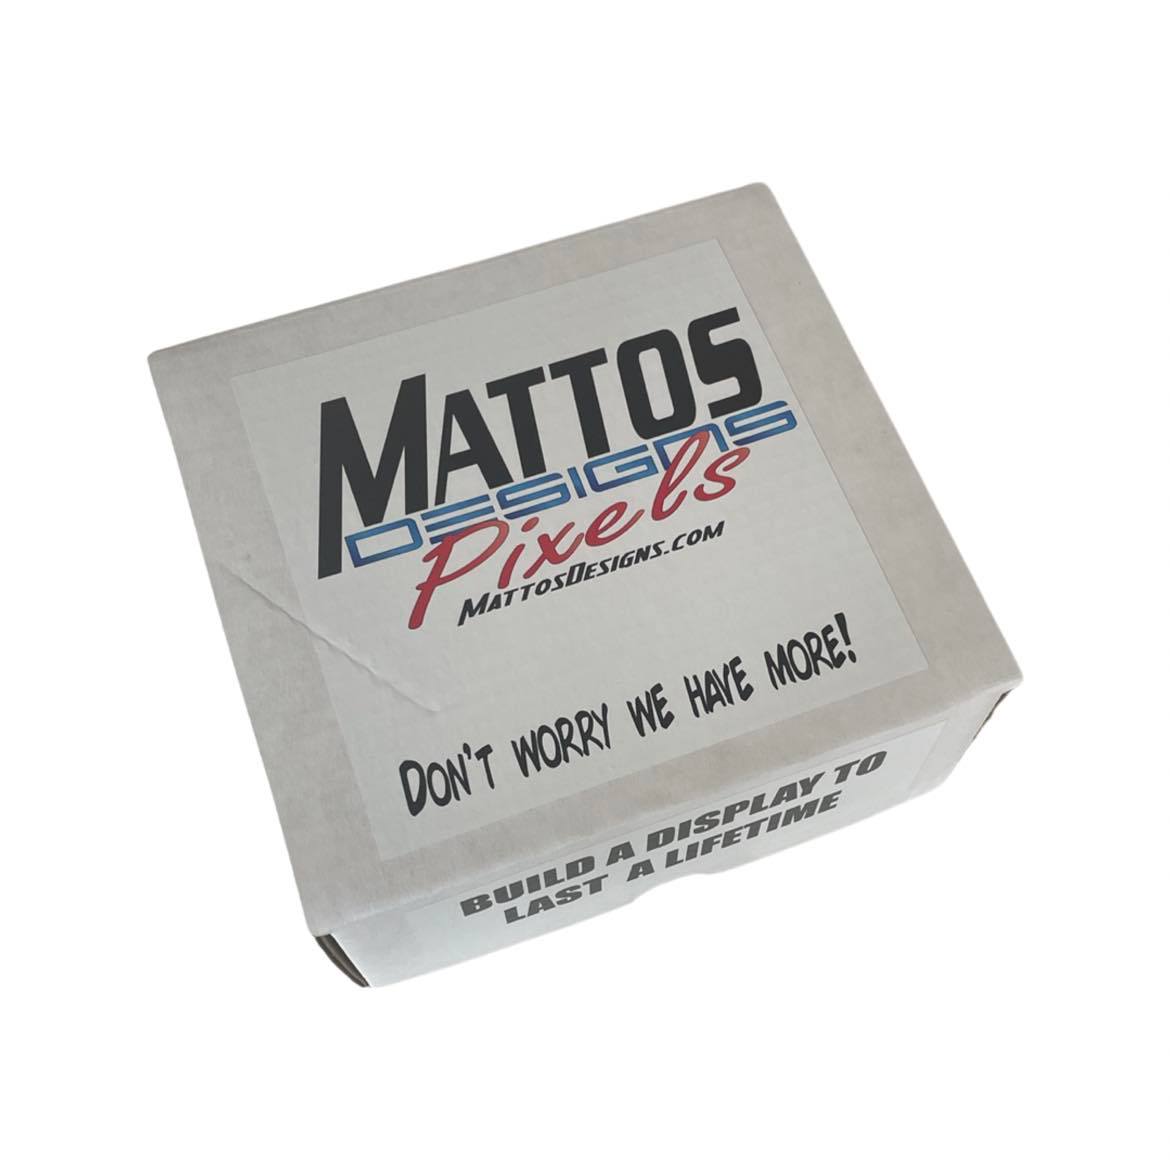 Mattos Designs 12v Resistor Pixels / 4in Spacing / Box of 100ct / xConnect